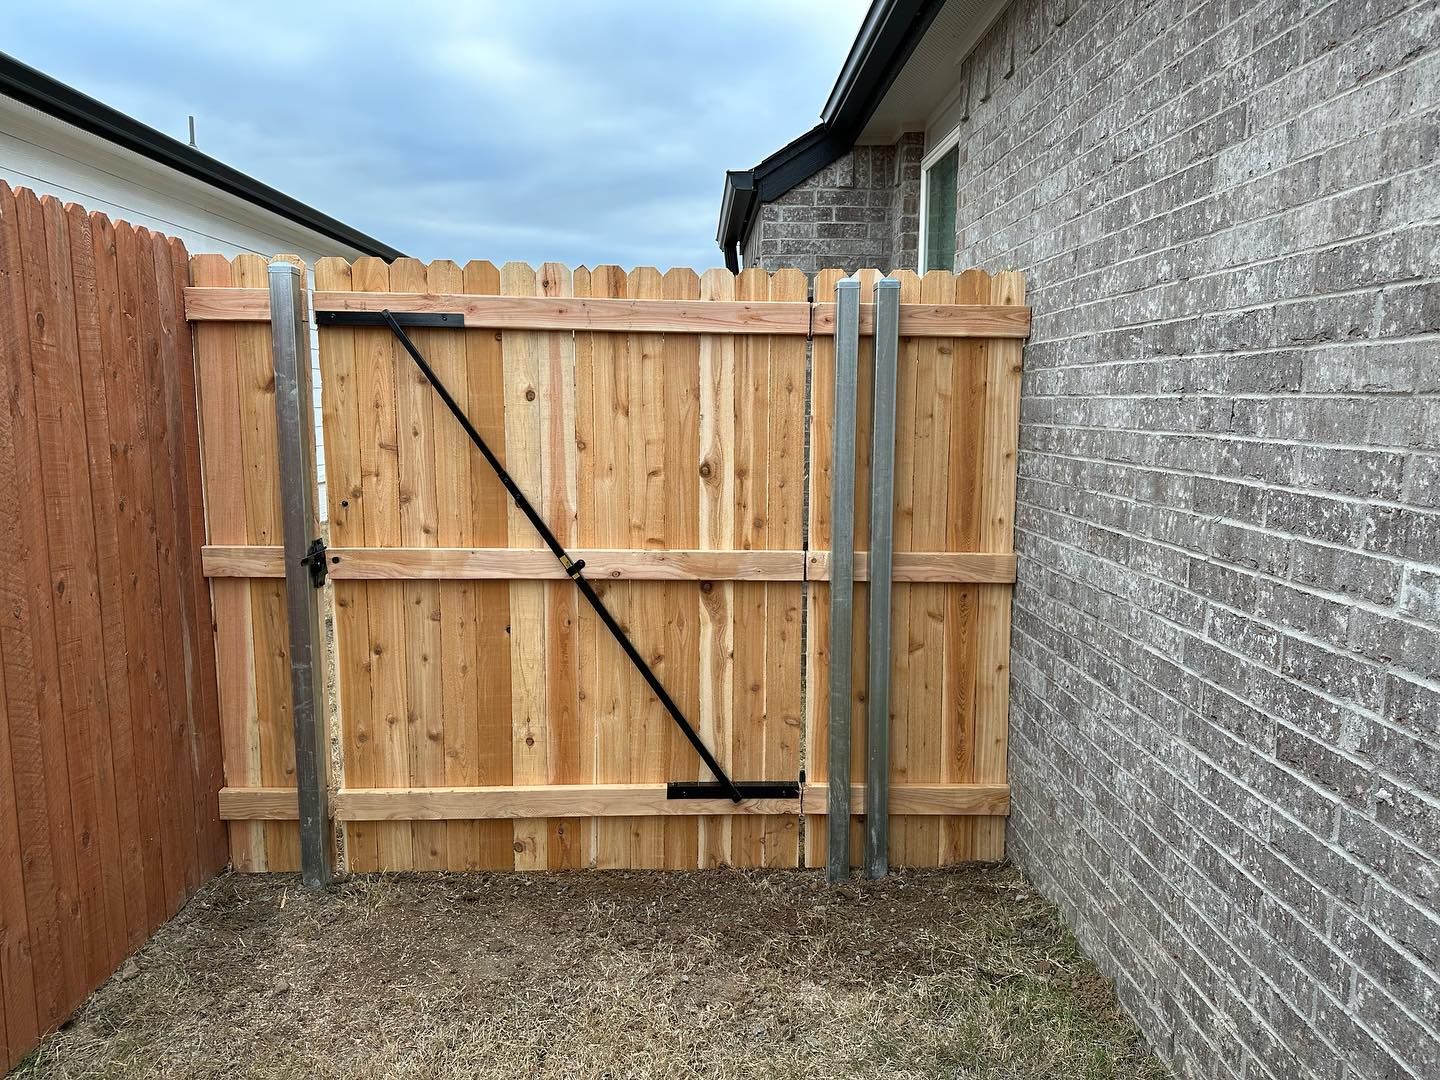 Fence for Lawn Dogs Outdoors Services in Sand Springs, OK